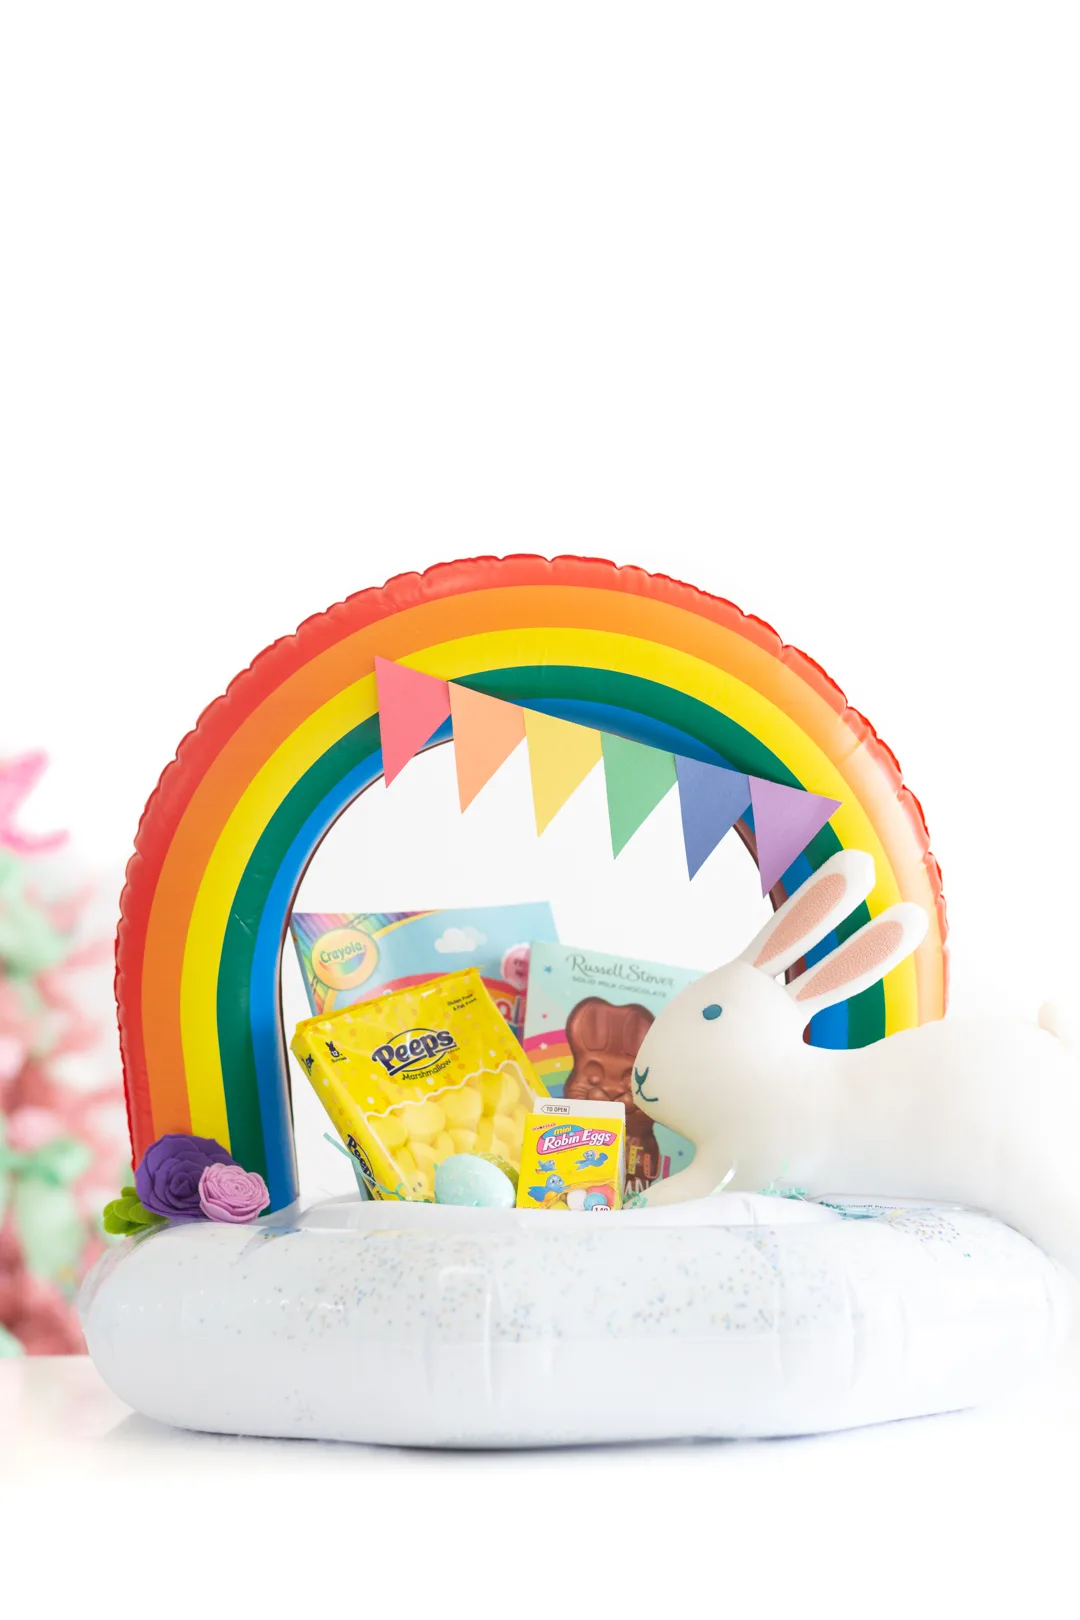 Rainbow pool float filled with Easter basket fillers like Peeps, Easter Candies, Coloring Books and Chocolate.